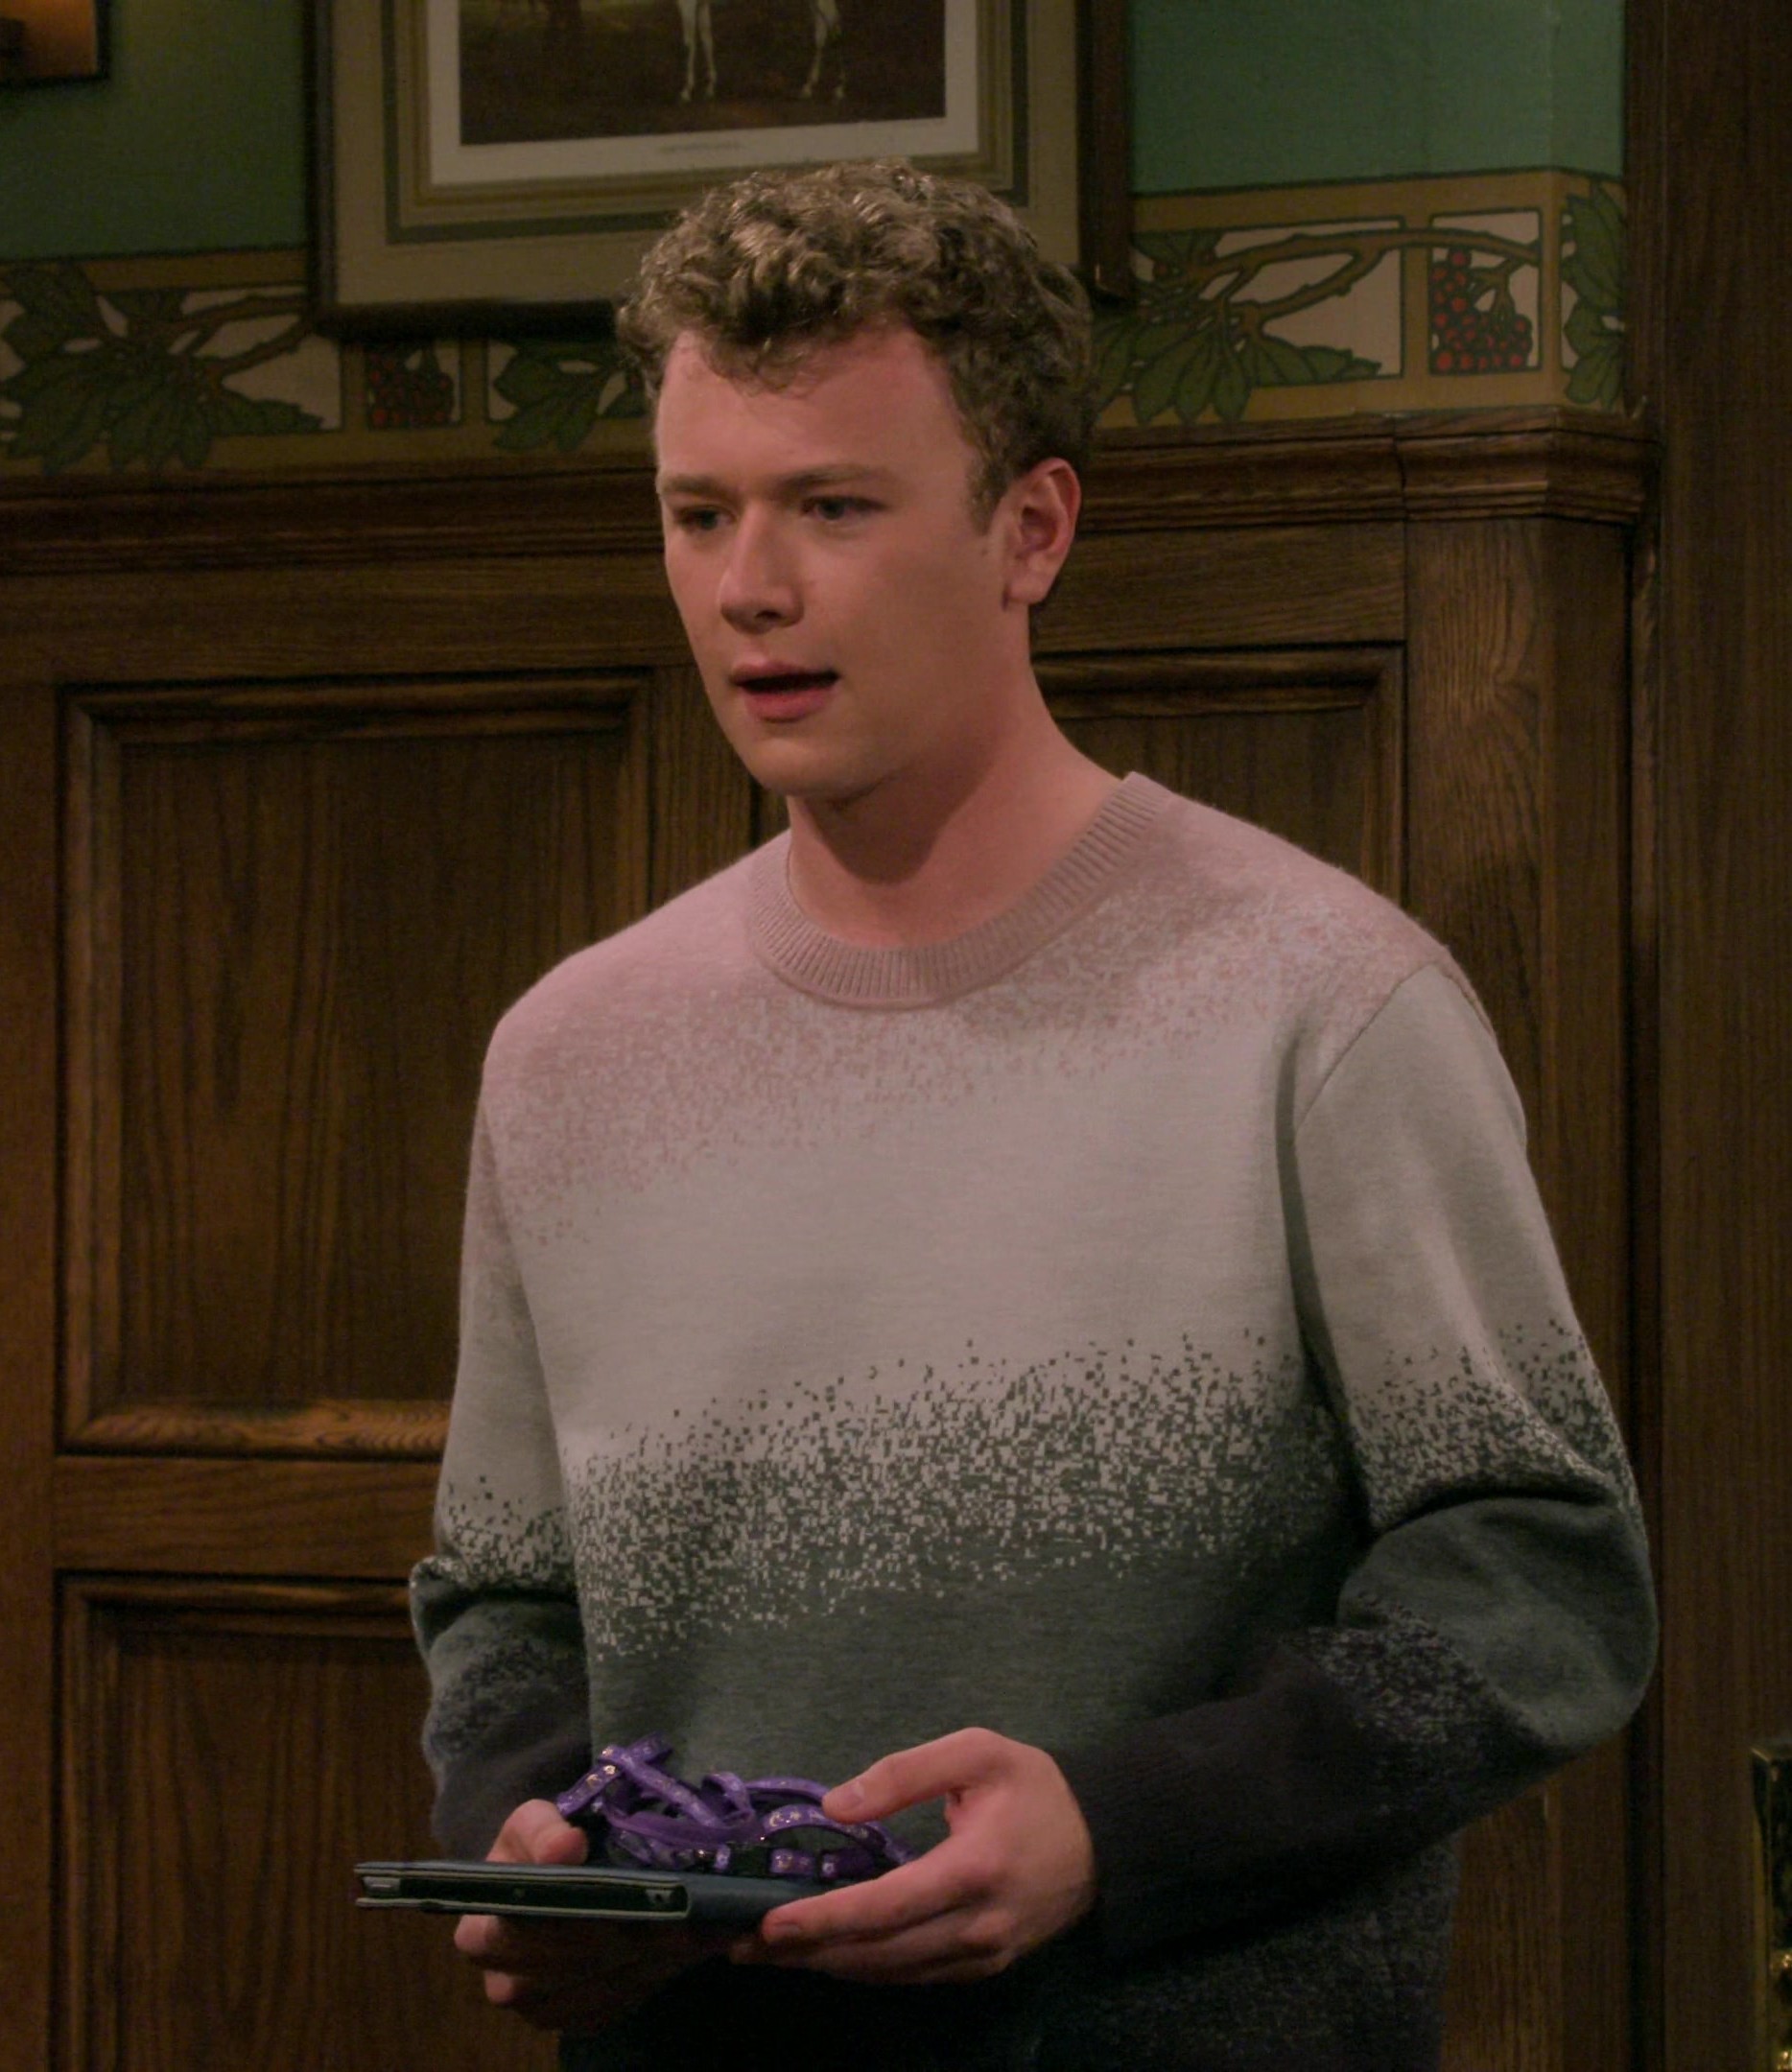 Worn on Frasier TV Show - Ombre Fade Crewneck Sweater Worn by Anders Keith as David Crane